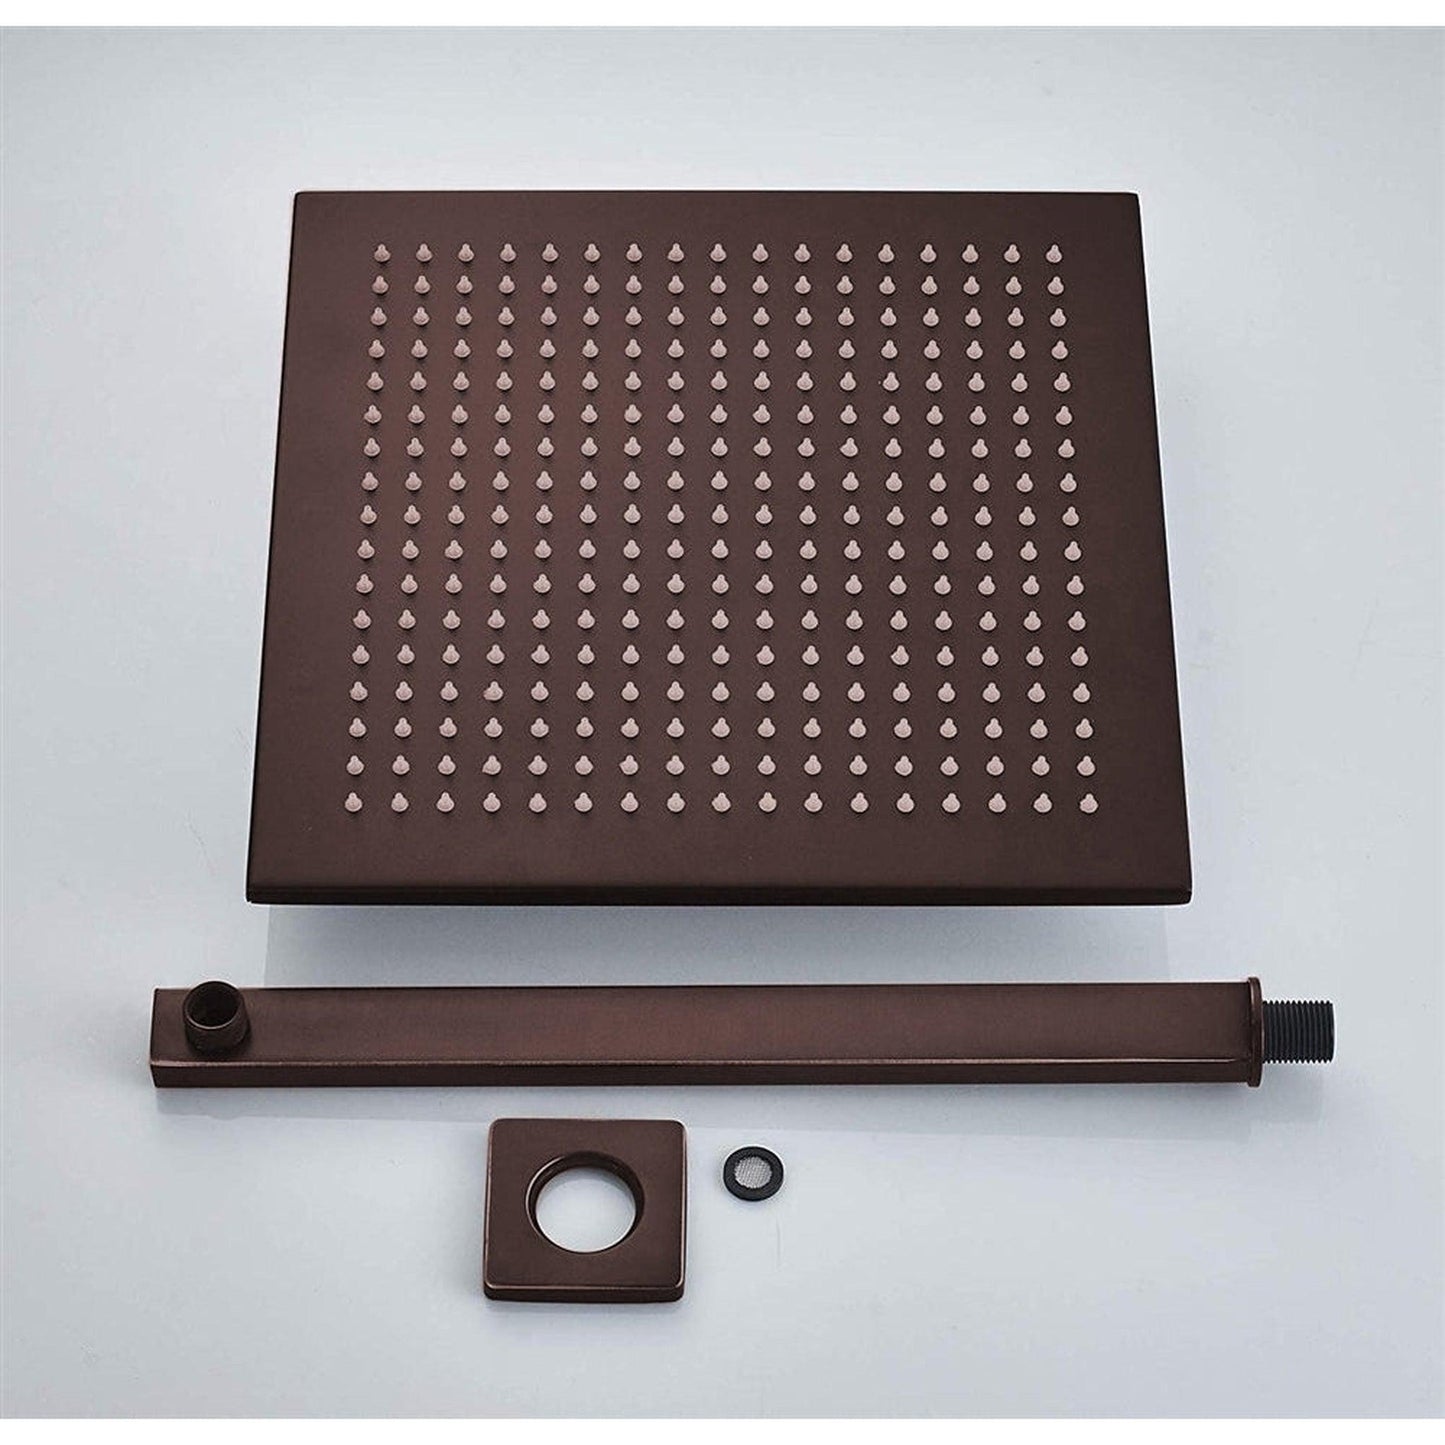 Fontana Sierra 12" Light Oil Rubbed Bronze Round Wall-Mounted LED Shower System With 6-Jet Body Sprays and Hand Shower